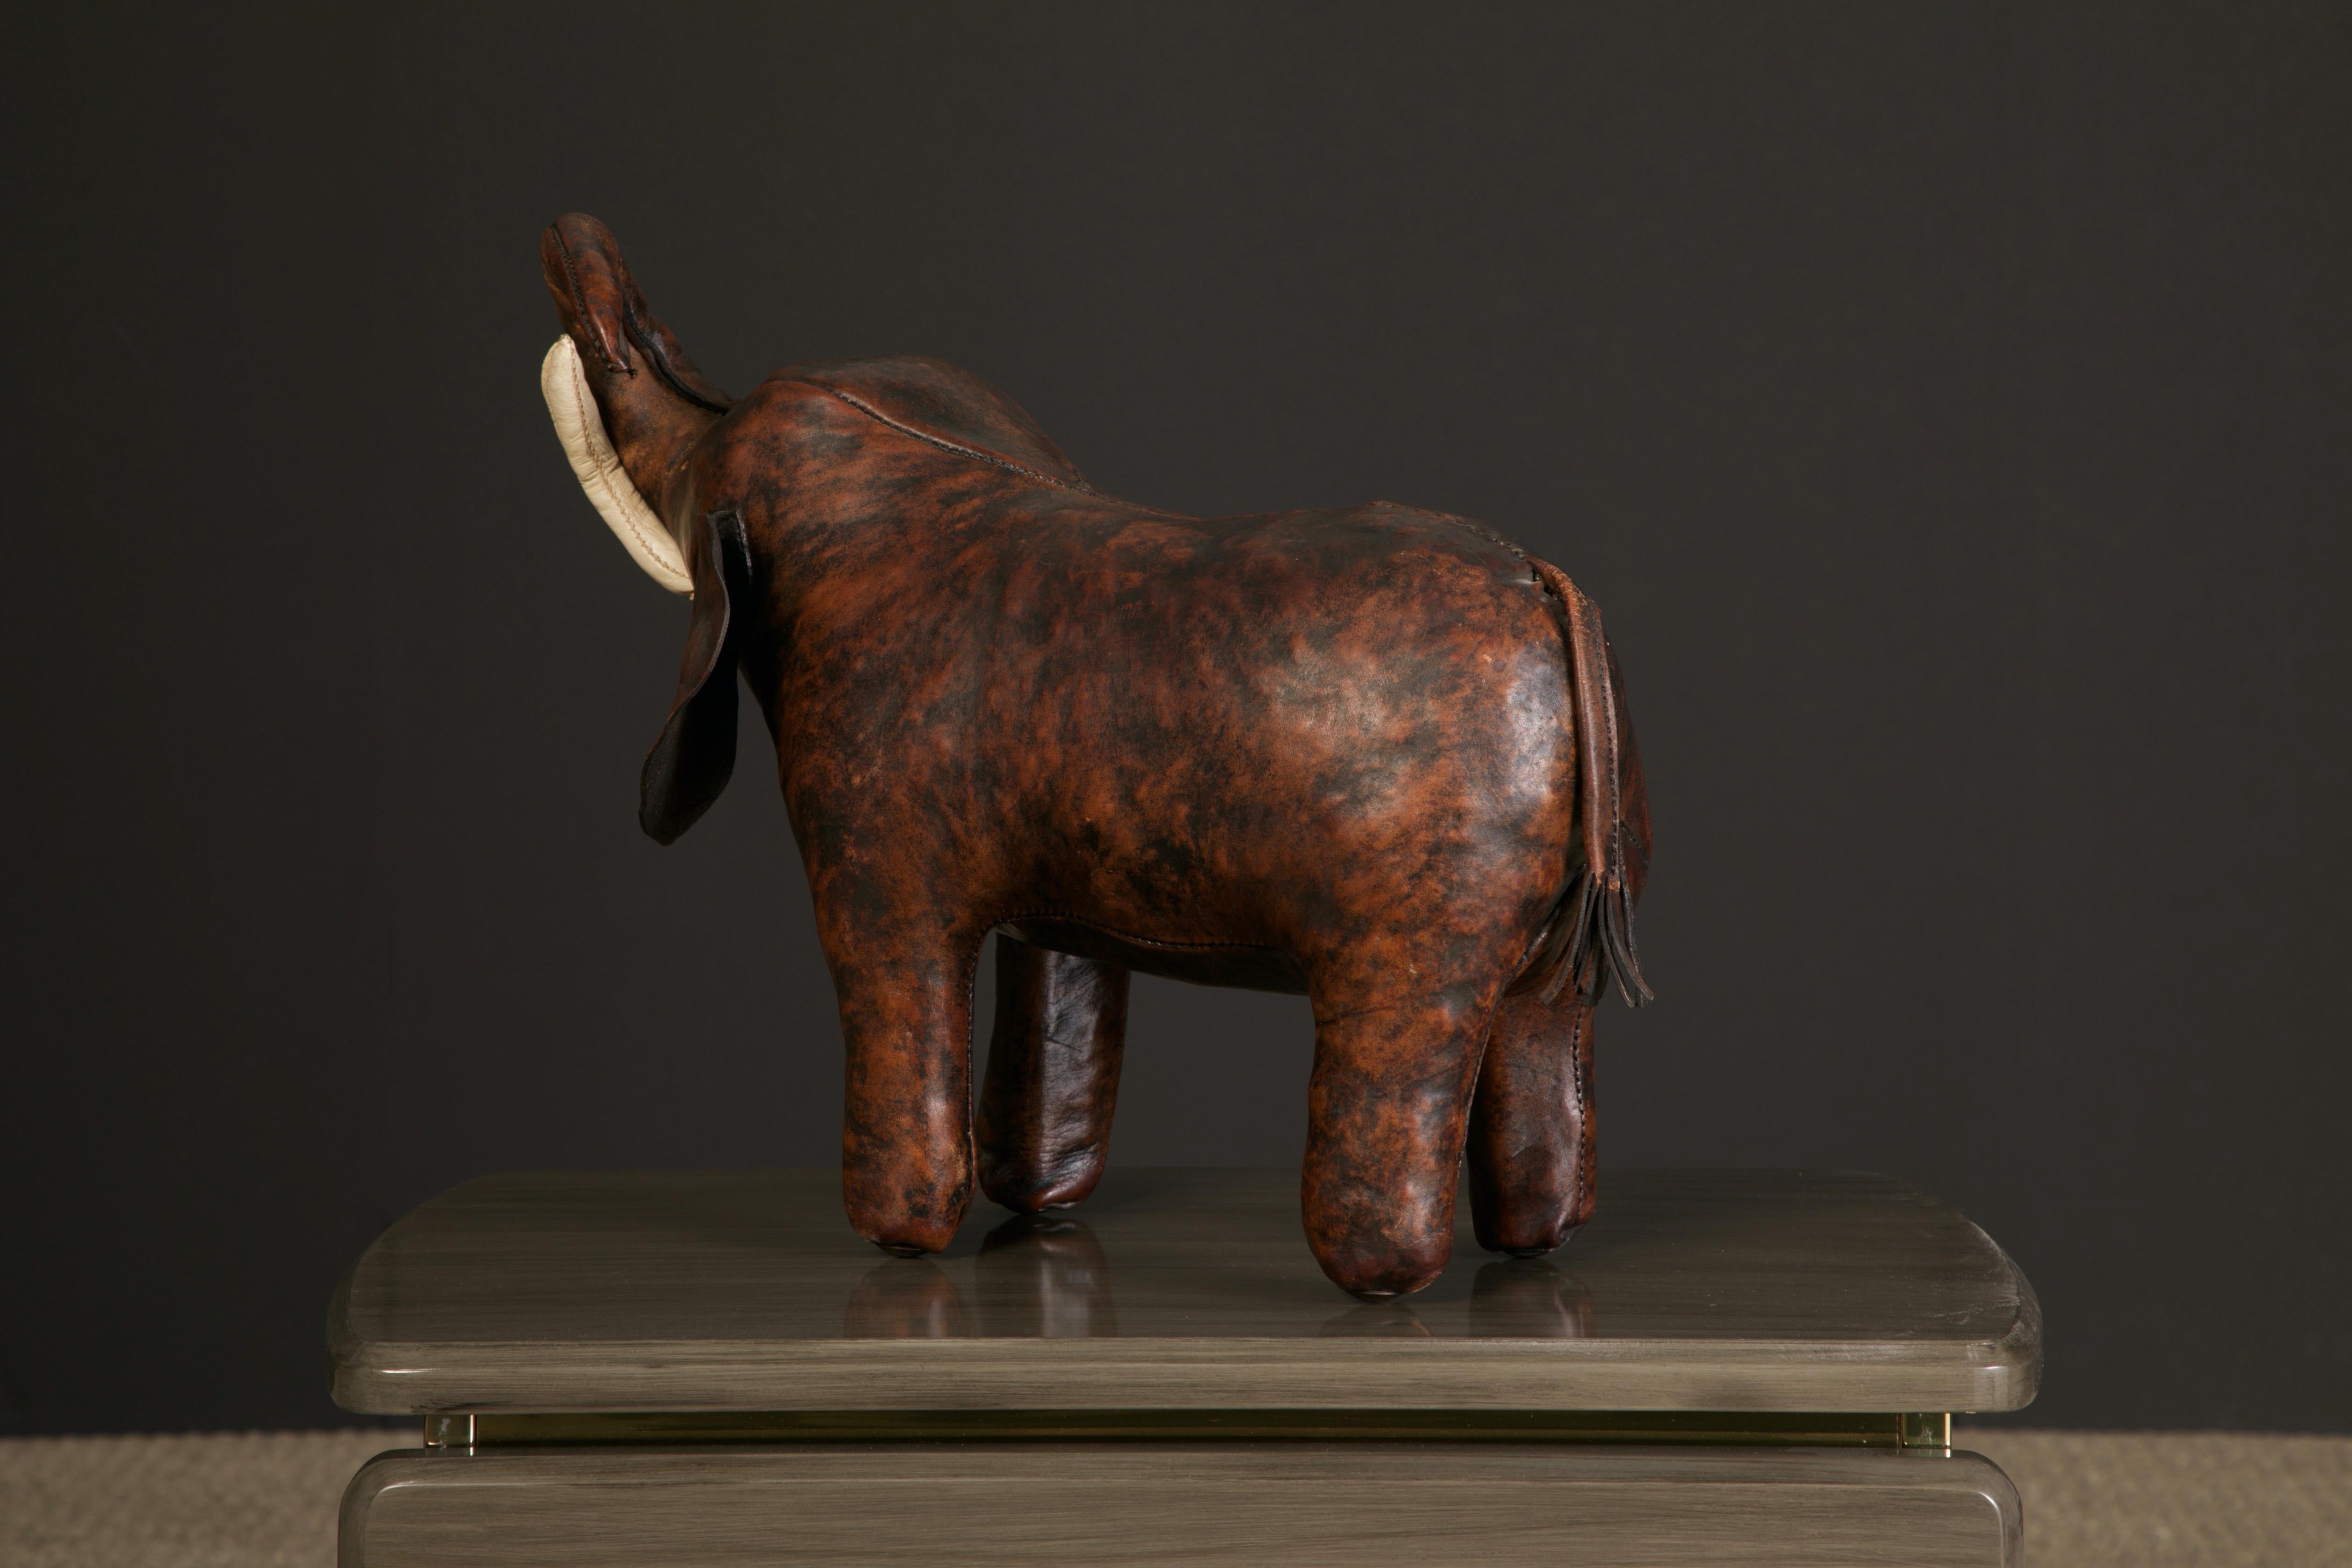 Patinated Leather Elephant Stool by Dimitri Omersa for Abercrombie & Fitch, c 1963, Signed